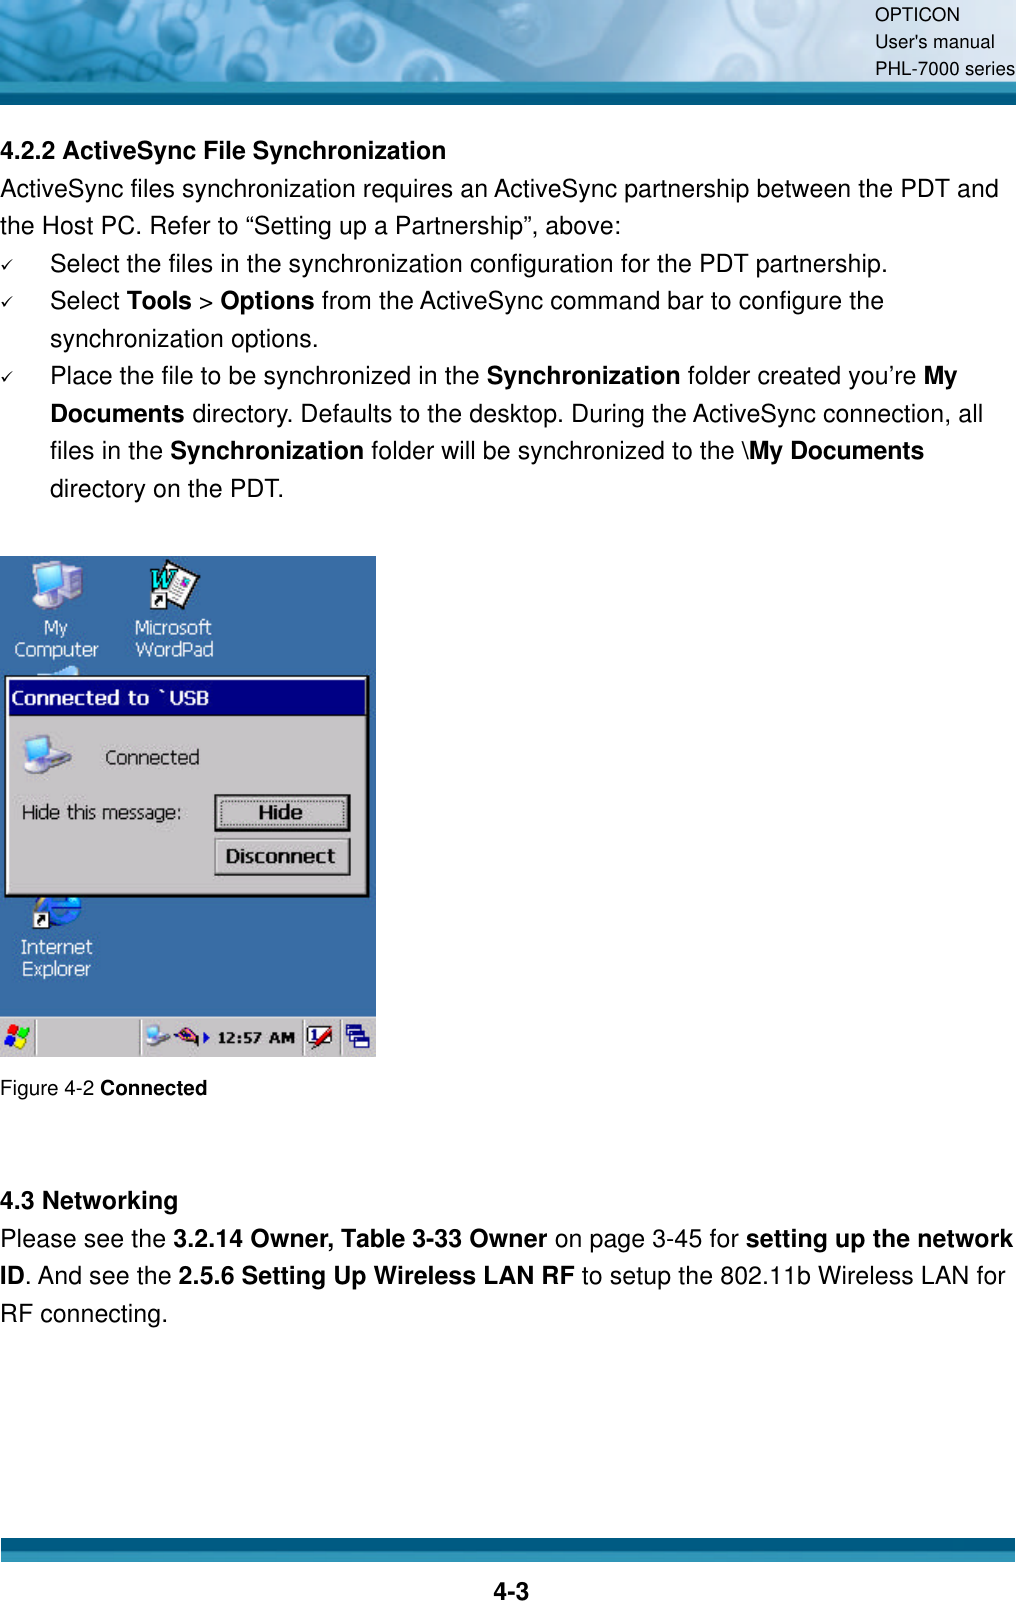 OPTICON User&apos;s manual PHL-7000 series    4-3 4.2.2 ActiveSync File Synchronization ActiveSync files synchronization requires an ActiveSync partnership between the PDT and the Host PC. Refer to “Setting up a Partnership”, above: ü Select the files in the synchronization configuration for the PDT partnership. ü Select Tools &gt; Options from the ActiveSync command bar to configure the synchronization options. ü Place the file to be synchronized in the Synchronization folder created you’re My Documents directory. Defaults to the desktop. During the ActiveSync connection, all files in the Synchronization folder will be synchronized to the \My Documents directory on the PDT.    Figure 4-2 Connected   4.3 Networking Please see the 3.2.14 Owner, Table 3-33 Owner on page 3-45 for setting up the network ID. And see the 2.5.6 Setting Up Wireless LAN RF to setup the 802.11b Wireless LAN for RF connecting.   